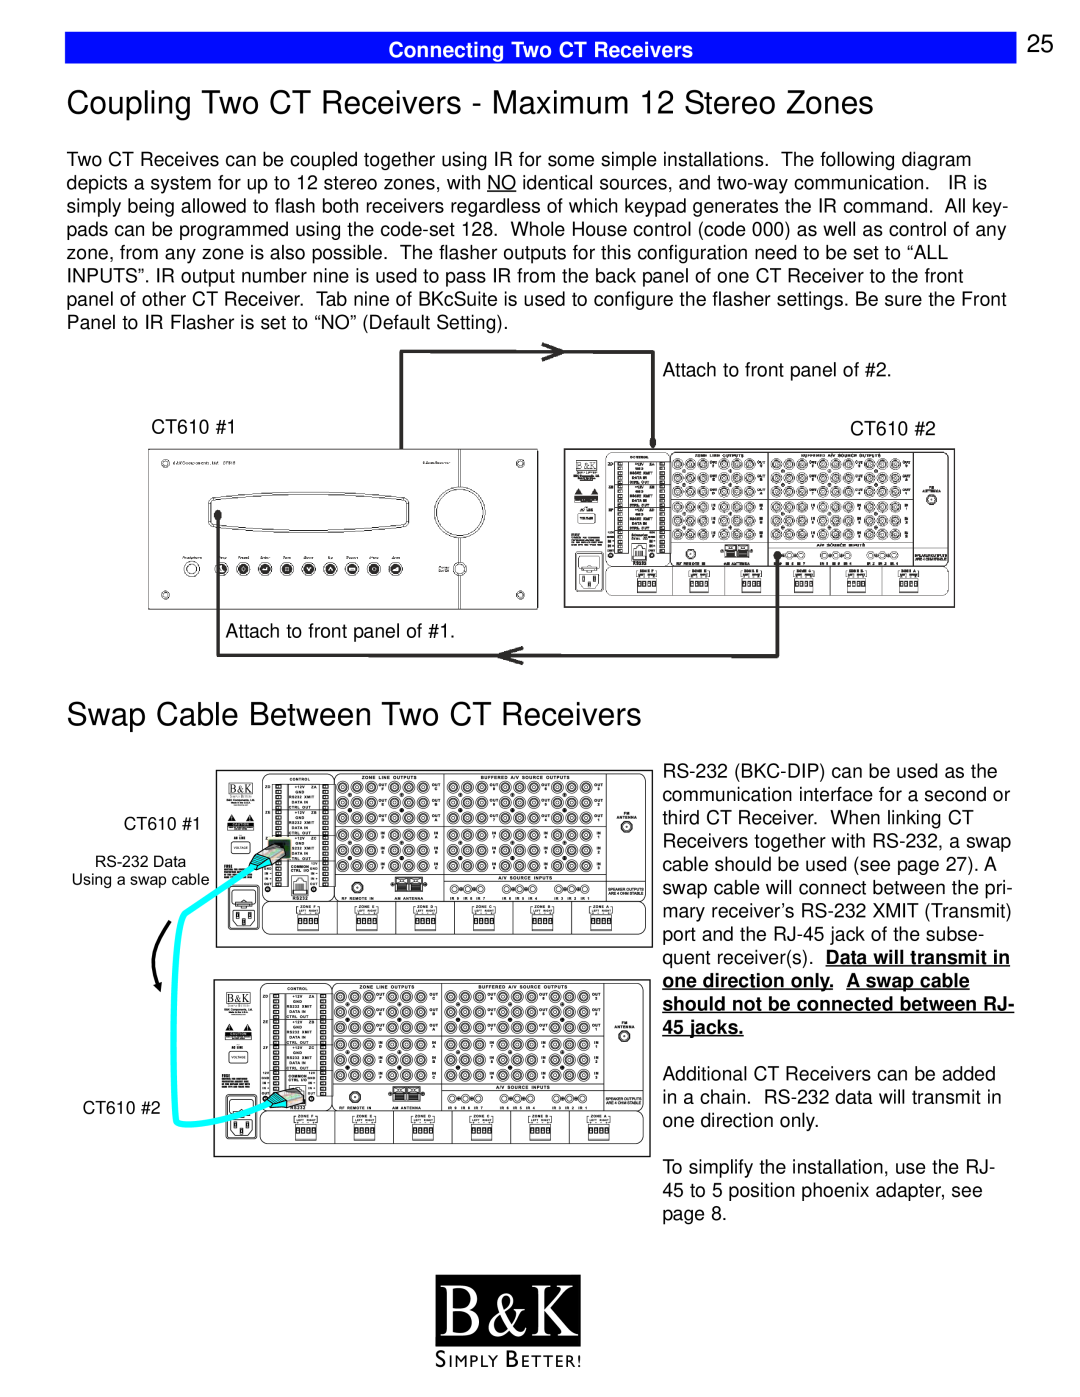 B&K CT300, CT600, CT602, CT310, CT610 user manual Swap Cable Between Two CT Receivers, B & K, Connecting Two CT Receivers 